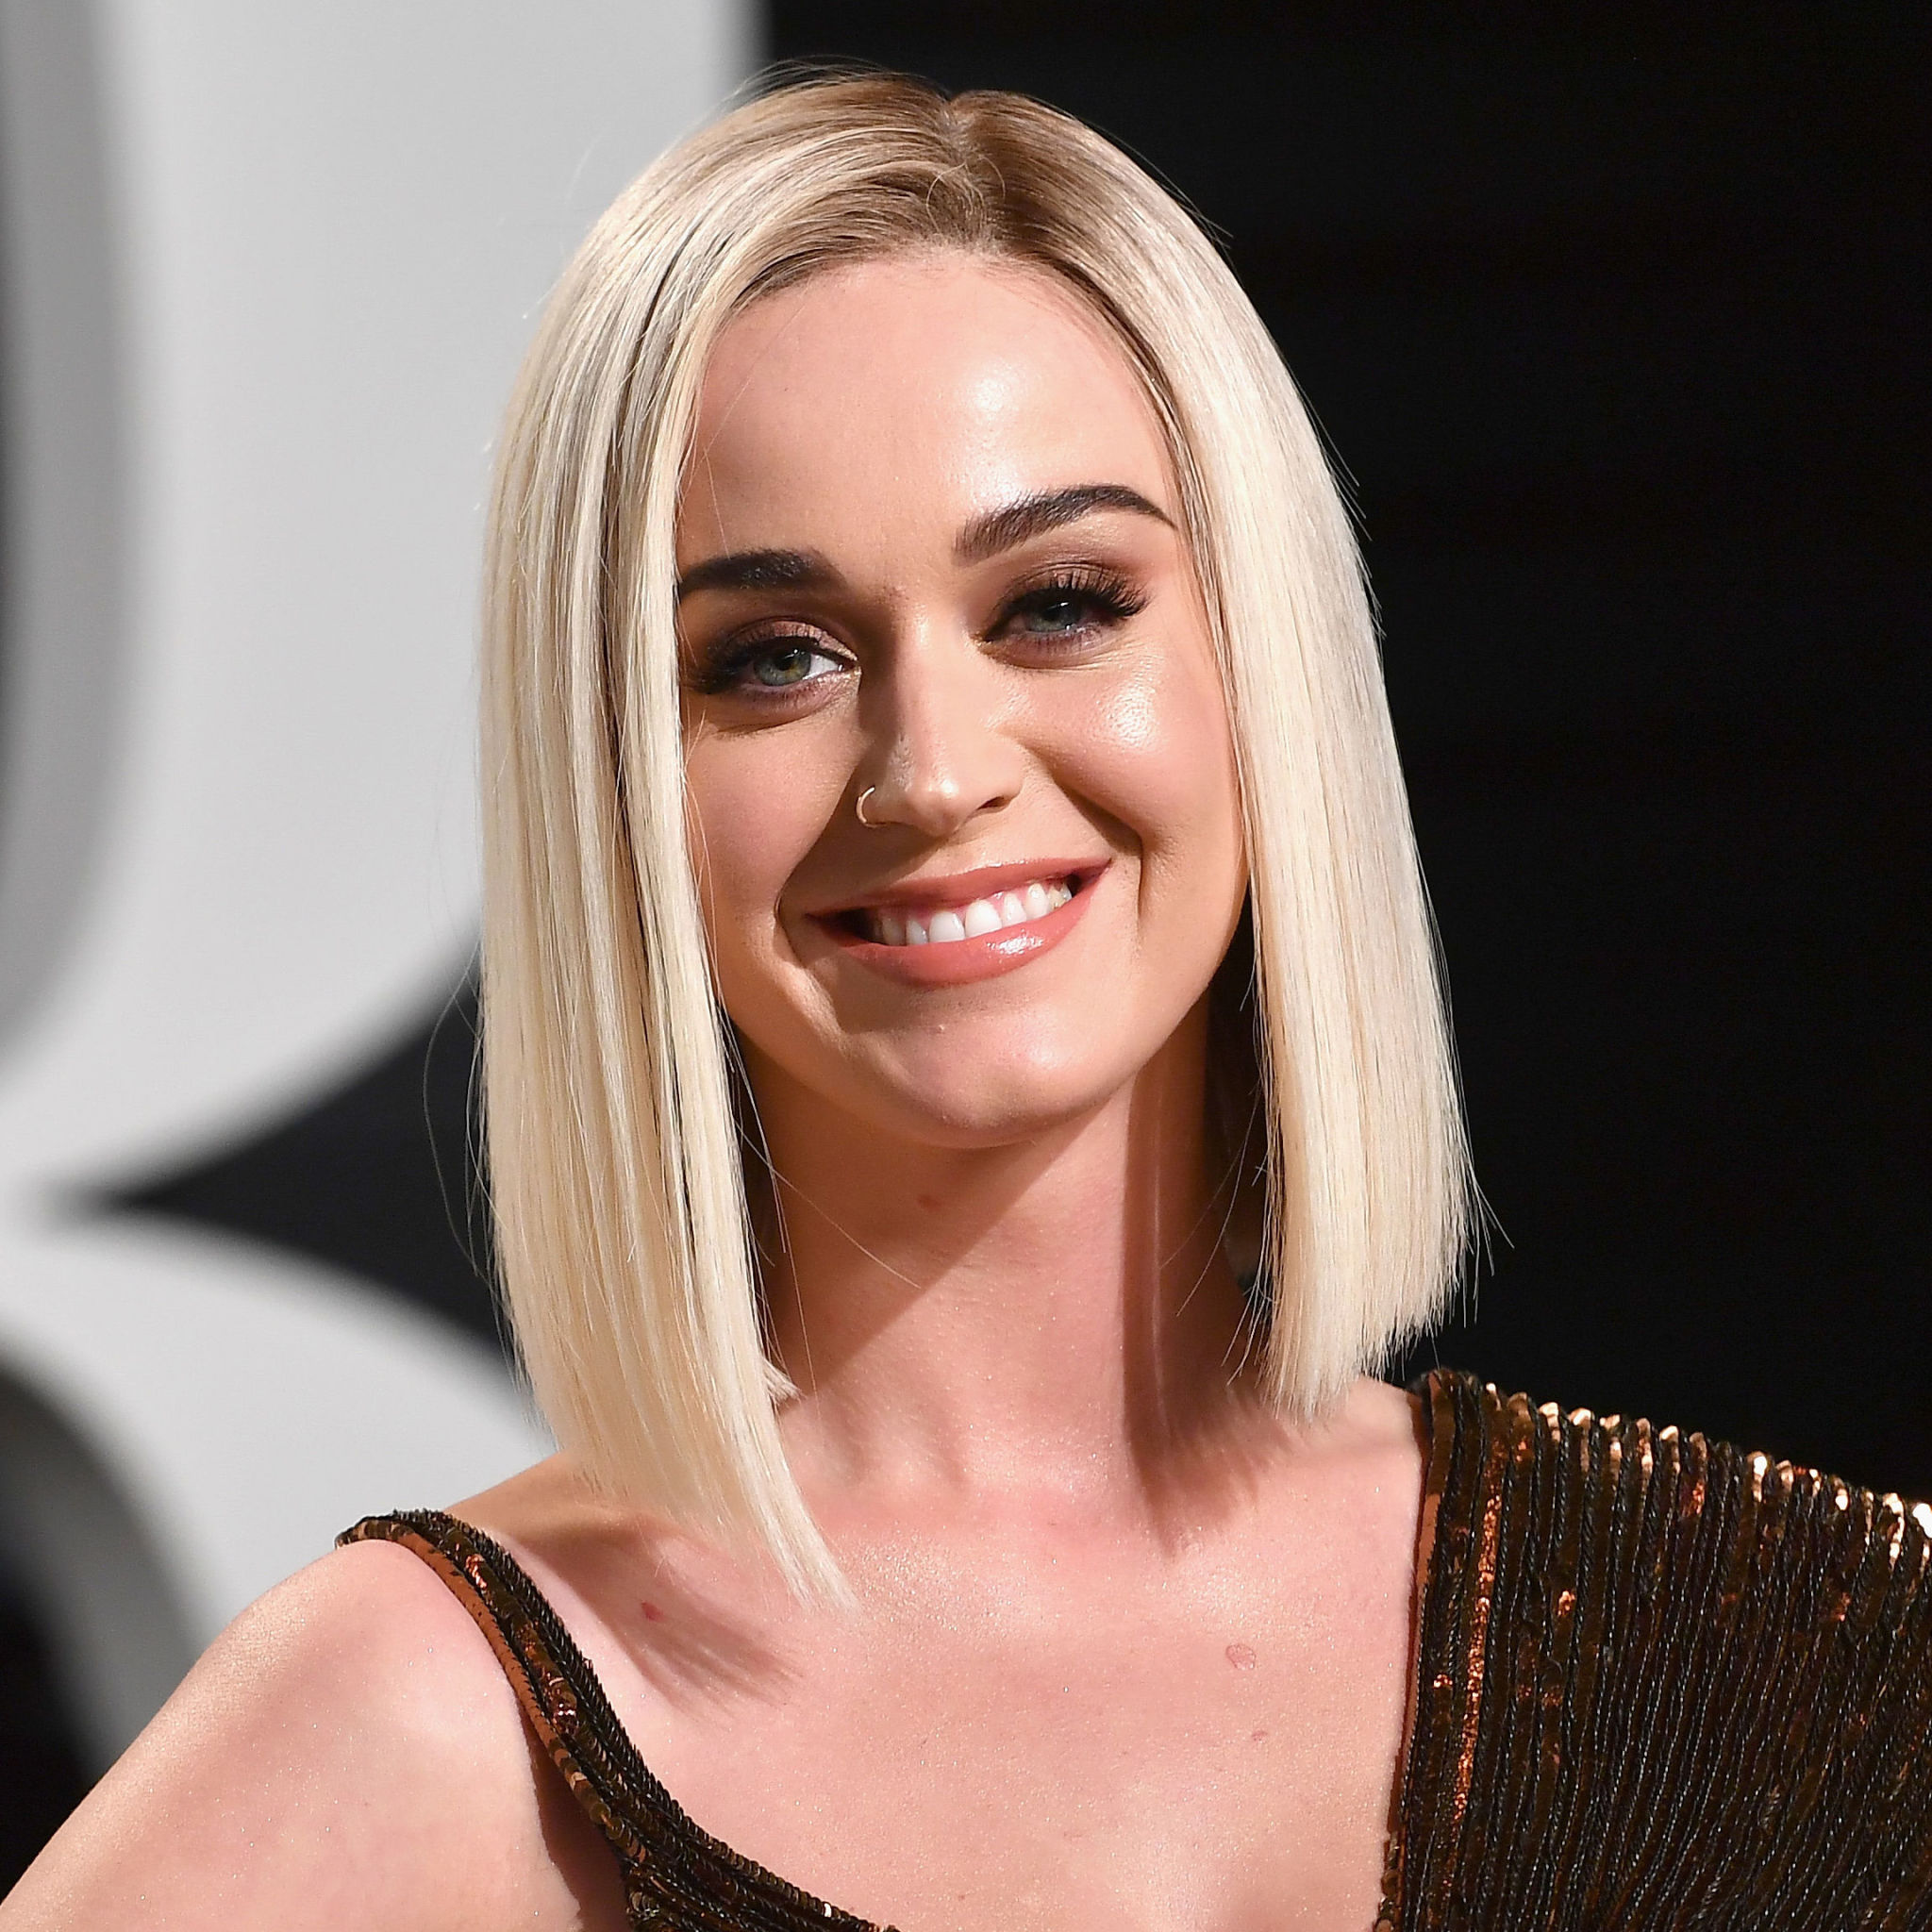 alex matas recommends katy perry sexy blonde pic